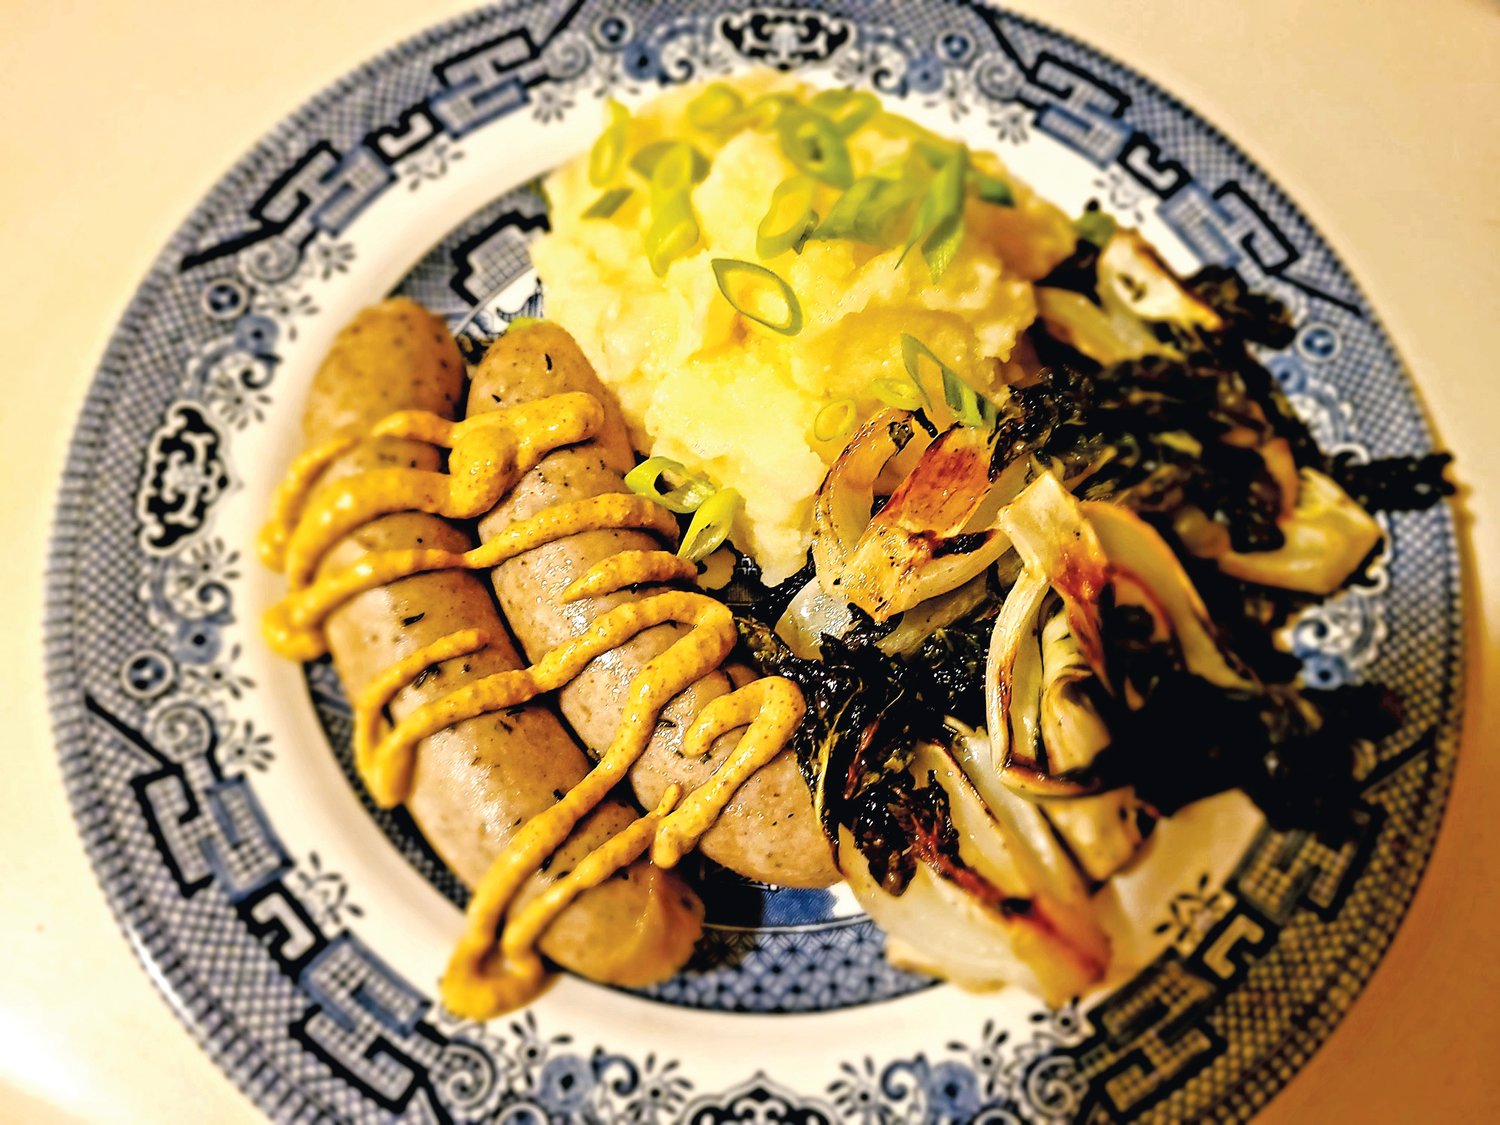 Bangers and mash — not a traditional American meal, but a tasty one nonetheless.